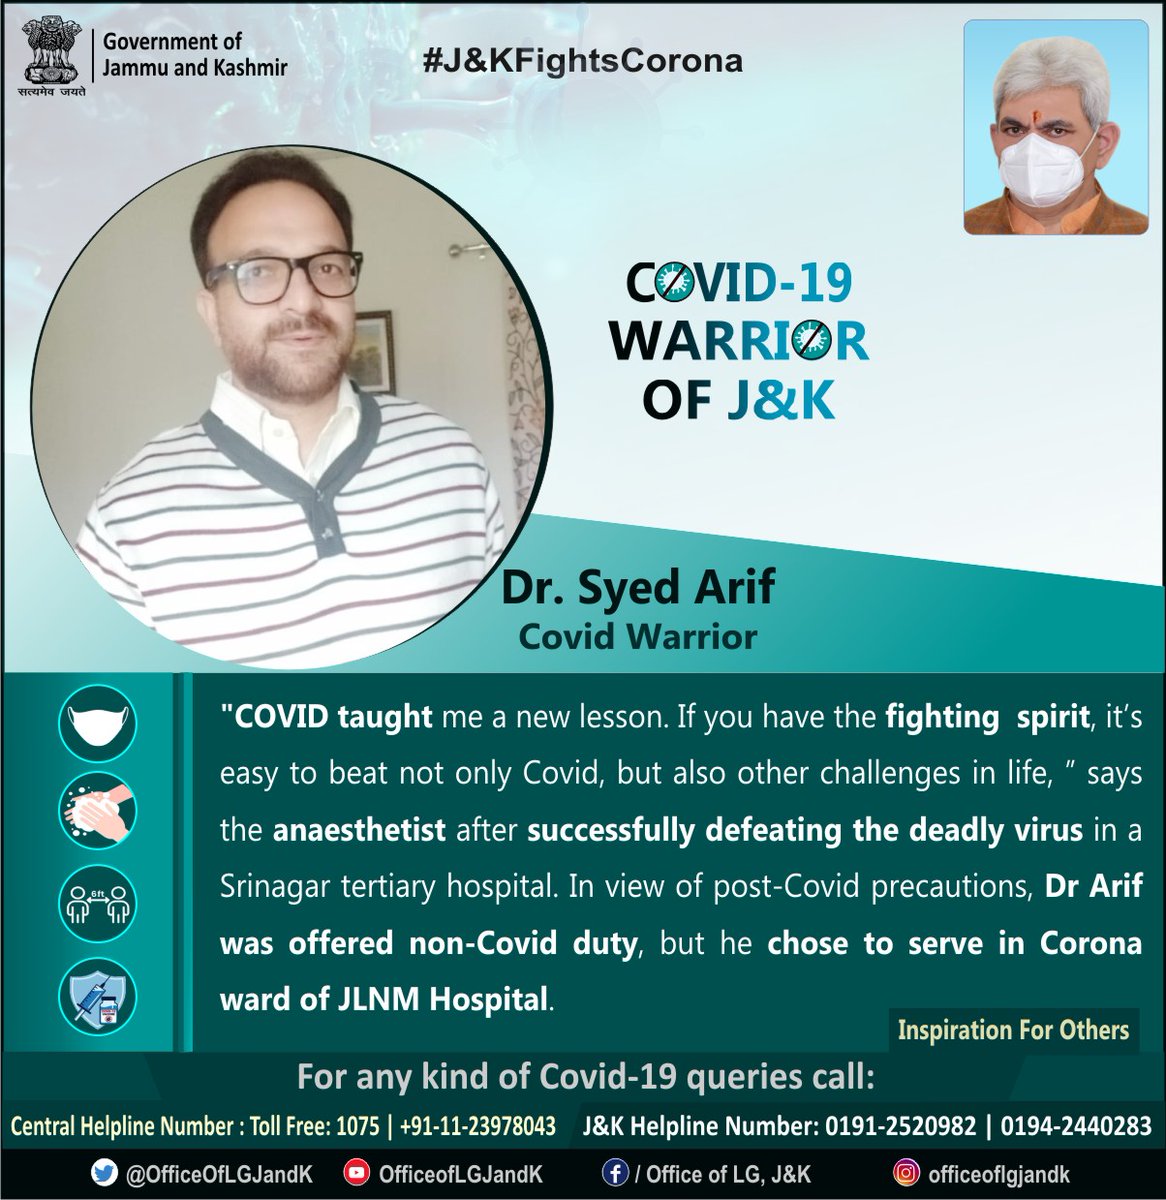 #JandKFightsCorona 
After recovery from #COVID19, Dr Syed Arif was offered to join non-Covid duty but he refused and start working at JLNM Hospital Srinagar to serve the Covid patients. 

#CovidWarriors 
#CovidHeroes
#InspirationForOthers